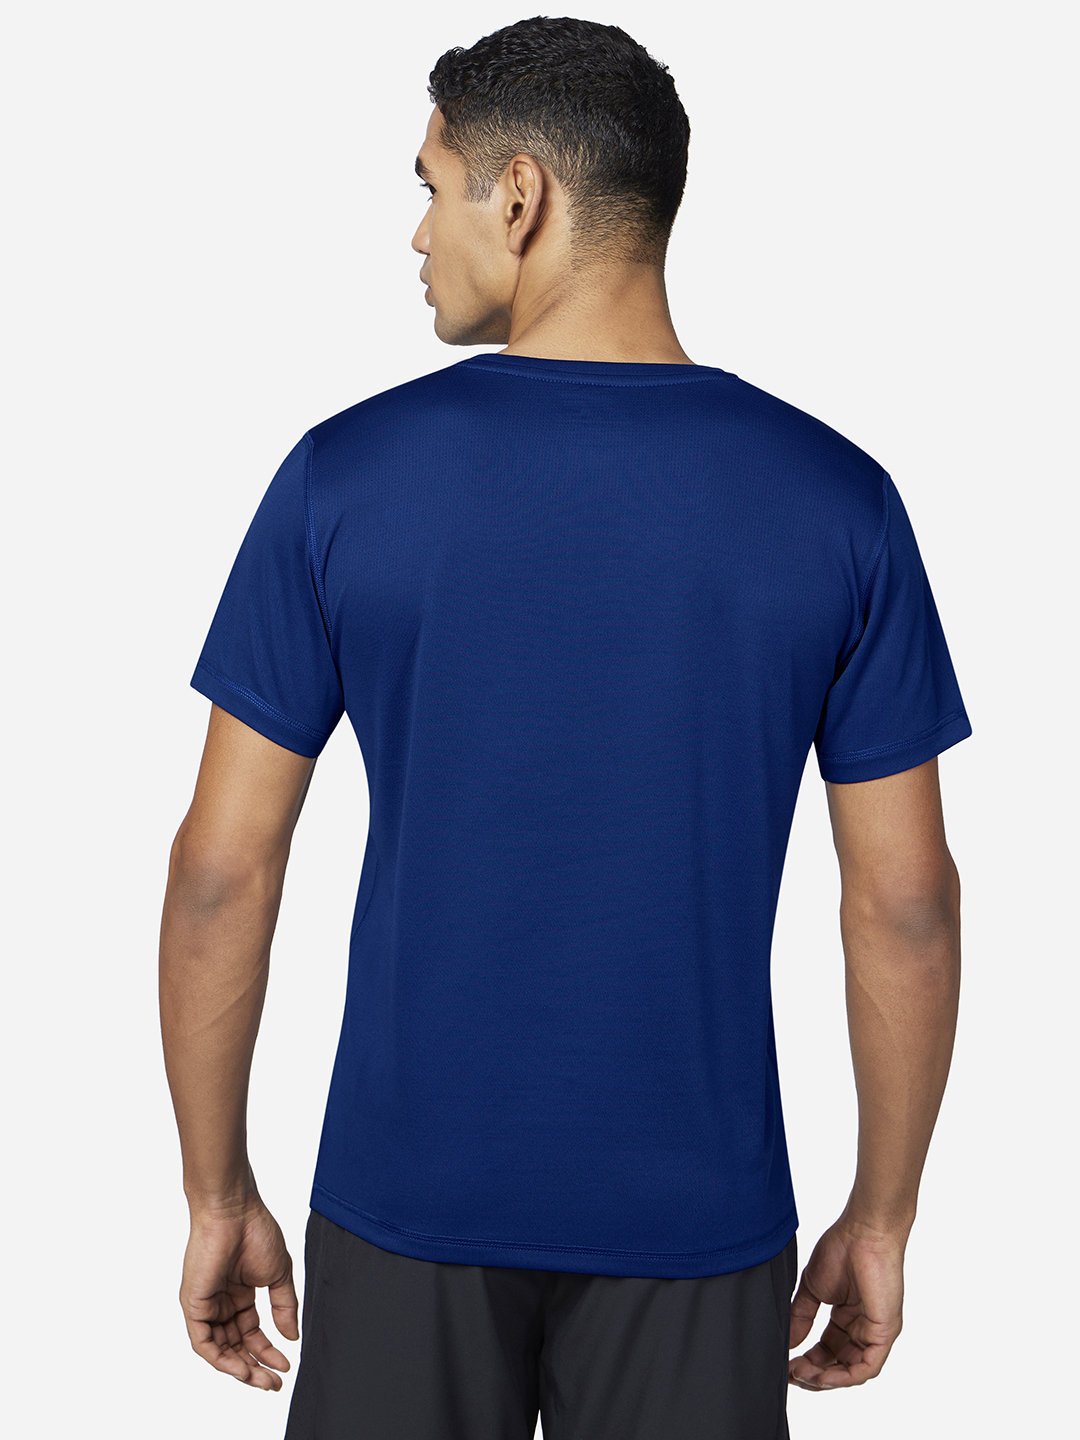 GO LIKE NEVER BEFORE TEE, BLUE/WHITE Apparels Bottom View